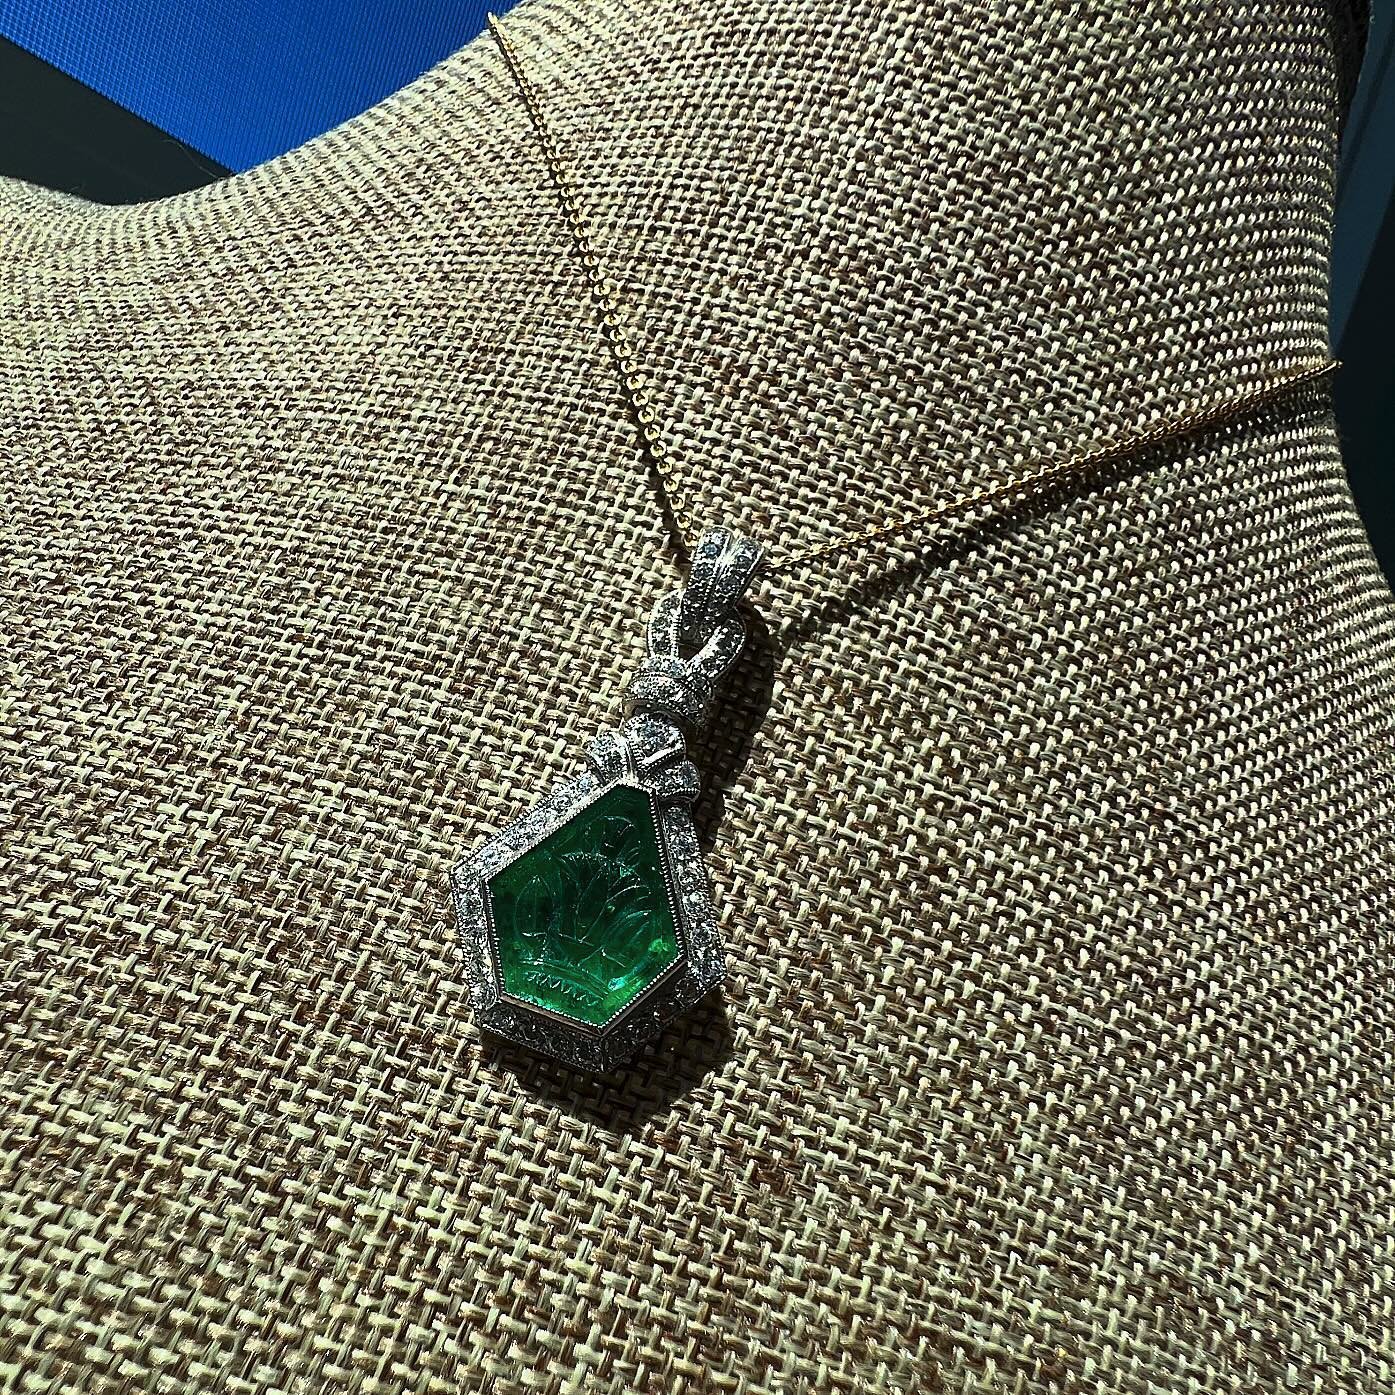 Vintage vibes! This carved emerald pendant is perfection!